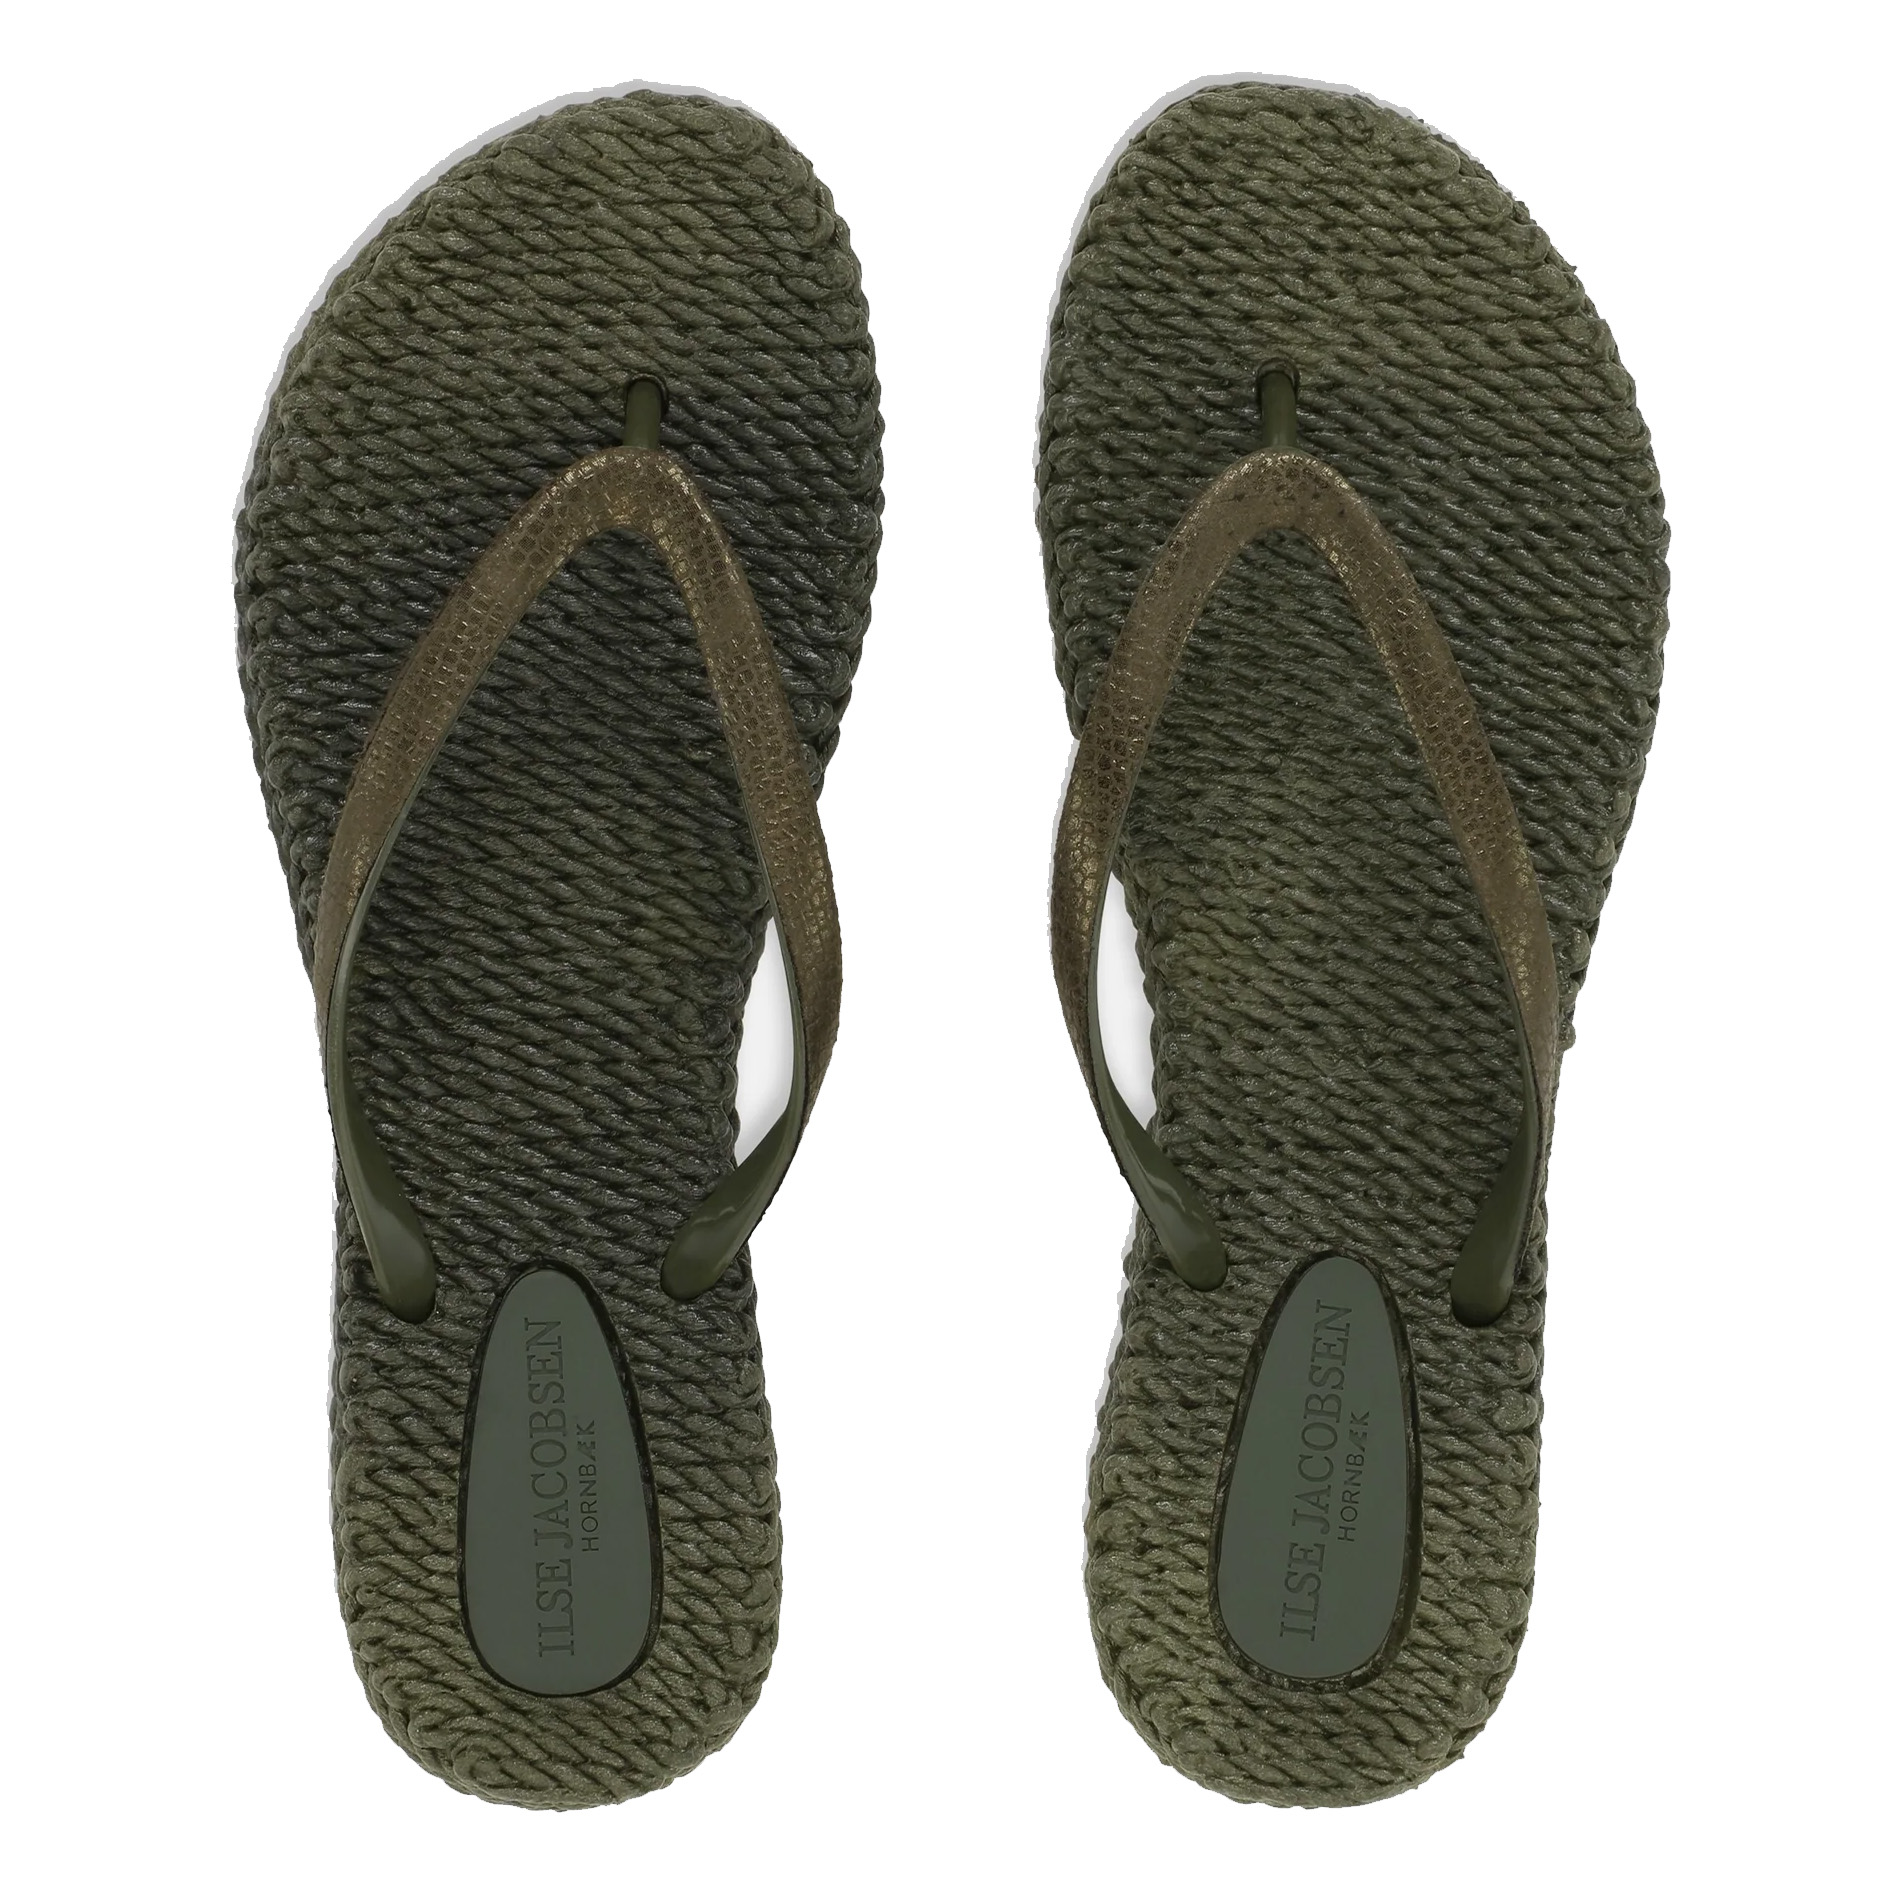 Ilse Jacobsen Flip Flop “snake” Army 10 Cheerful01m 410 F 515